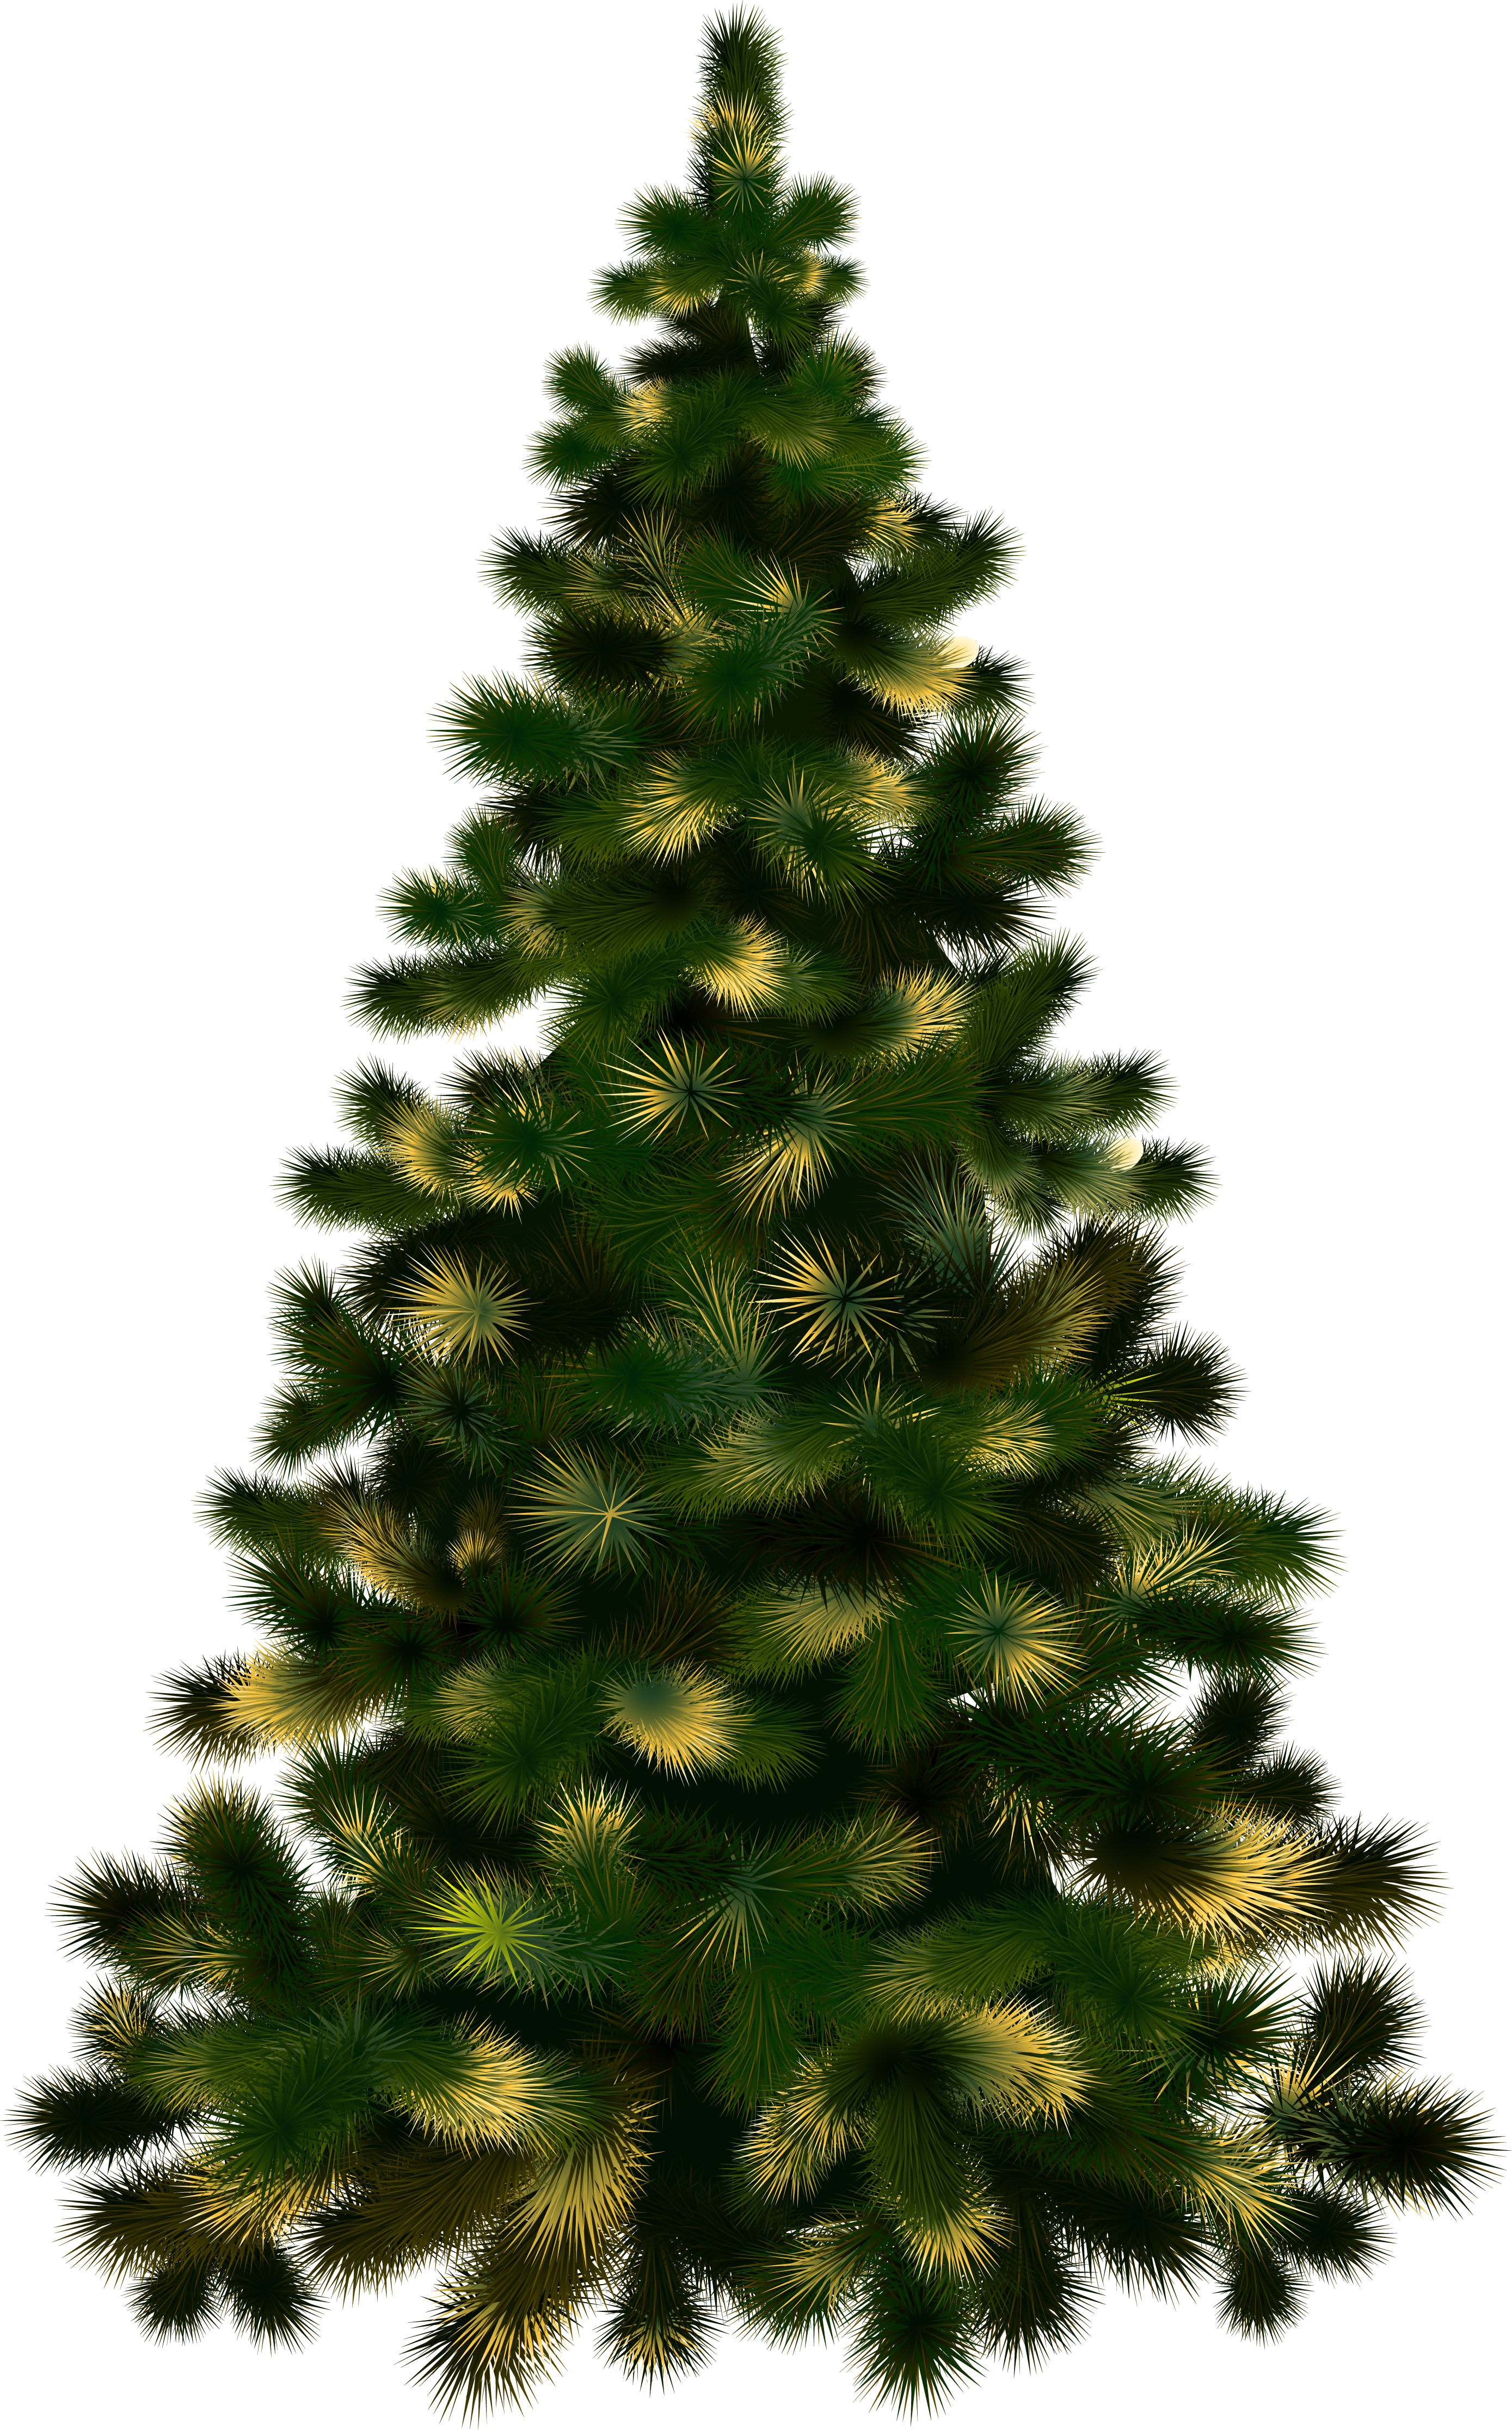 Christmas Tree without Lights PNG Image